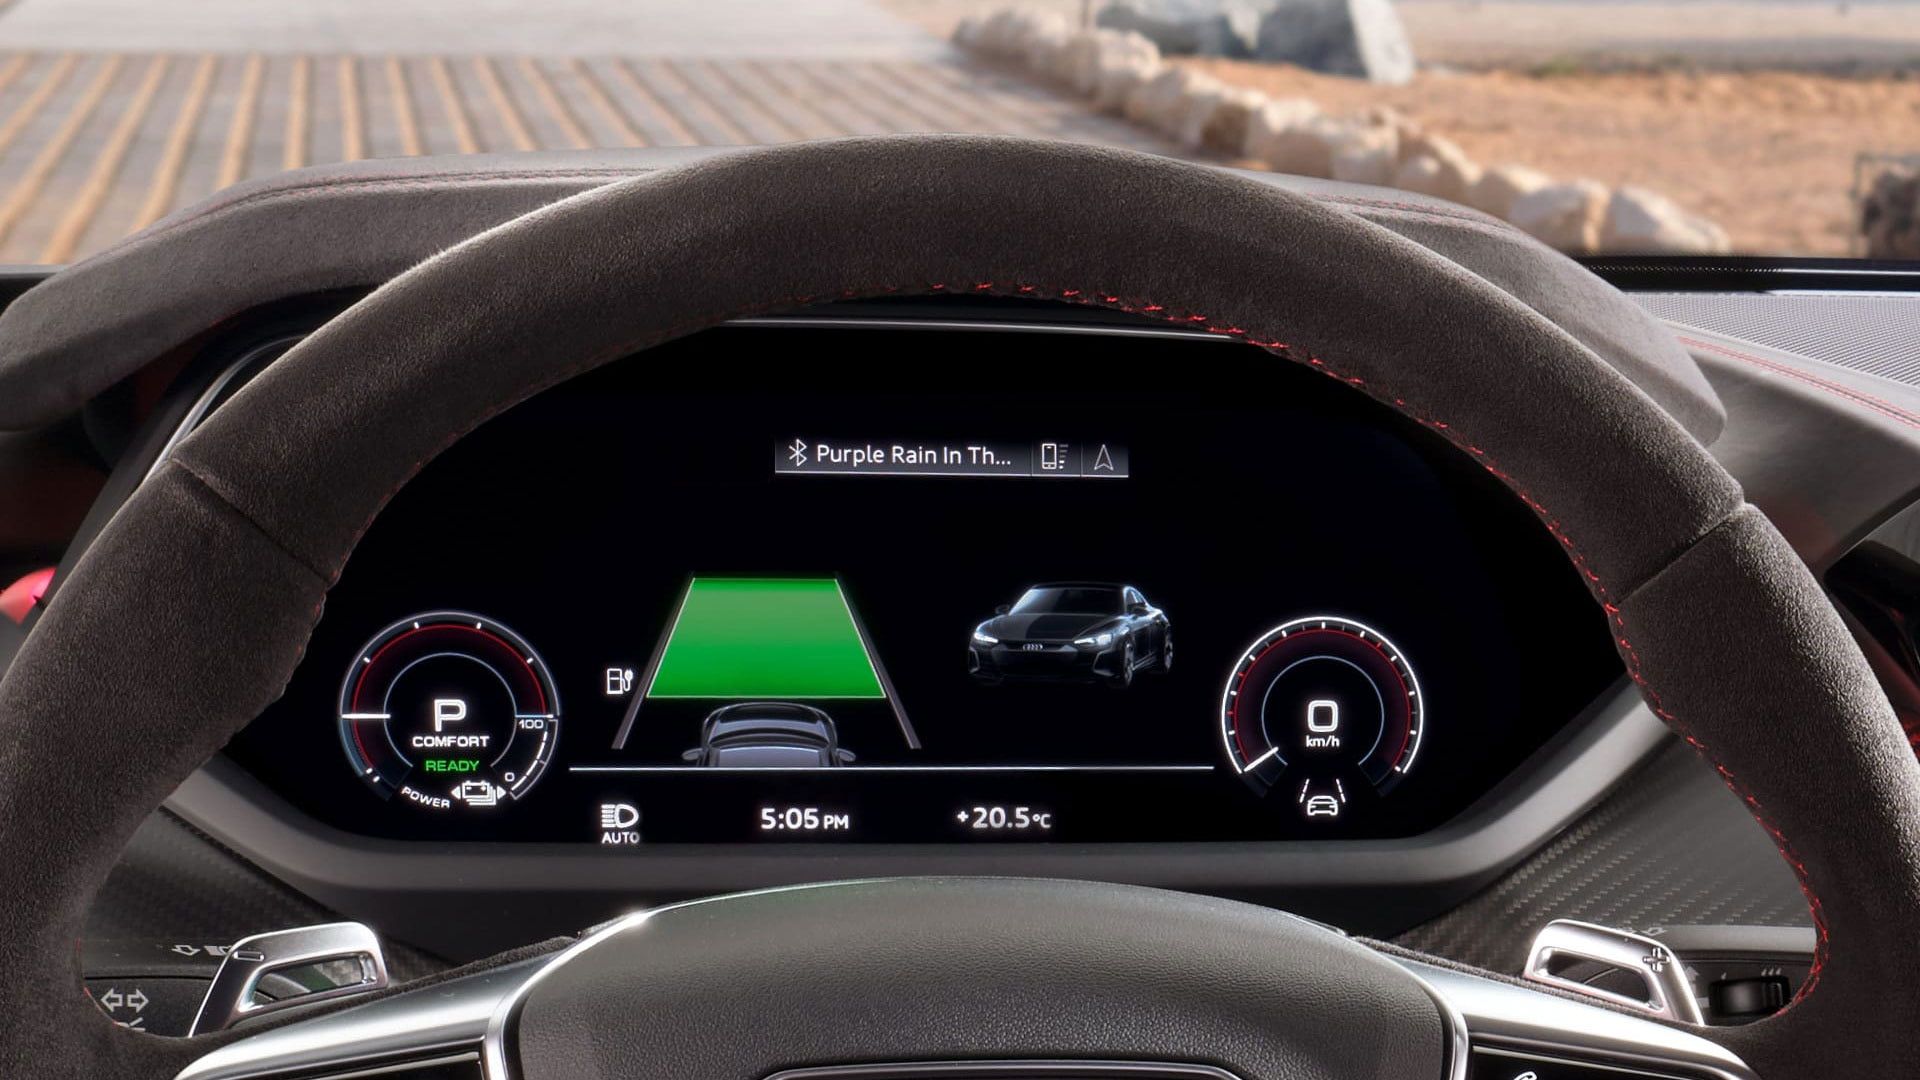 The heads-up display in the Audi e-tron GT.